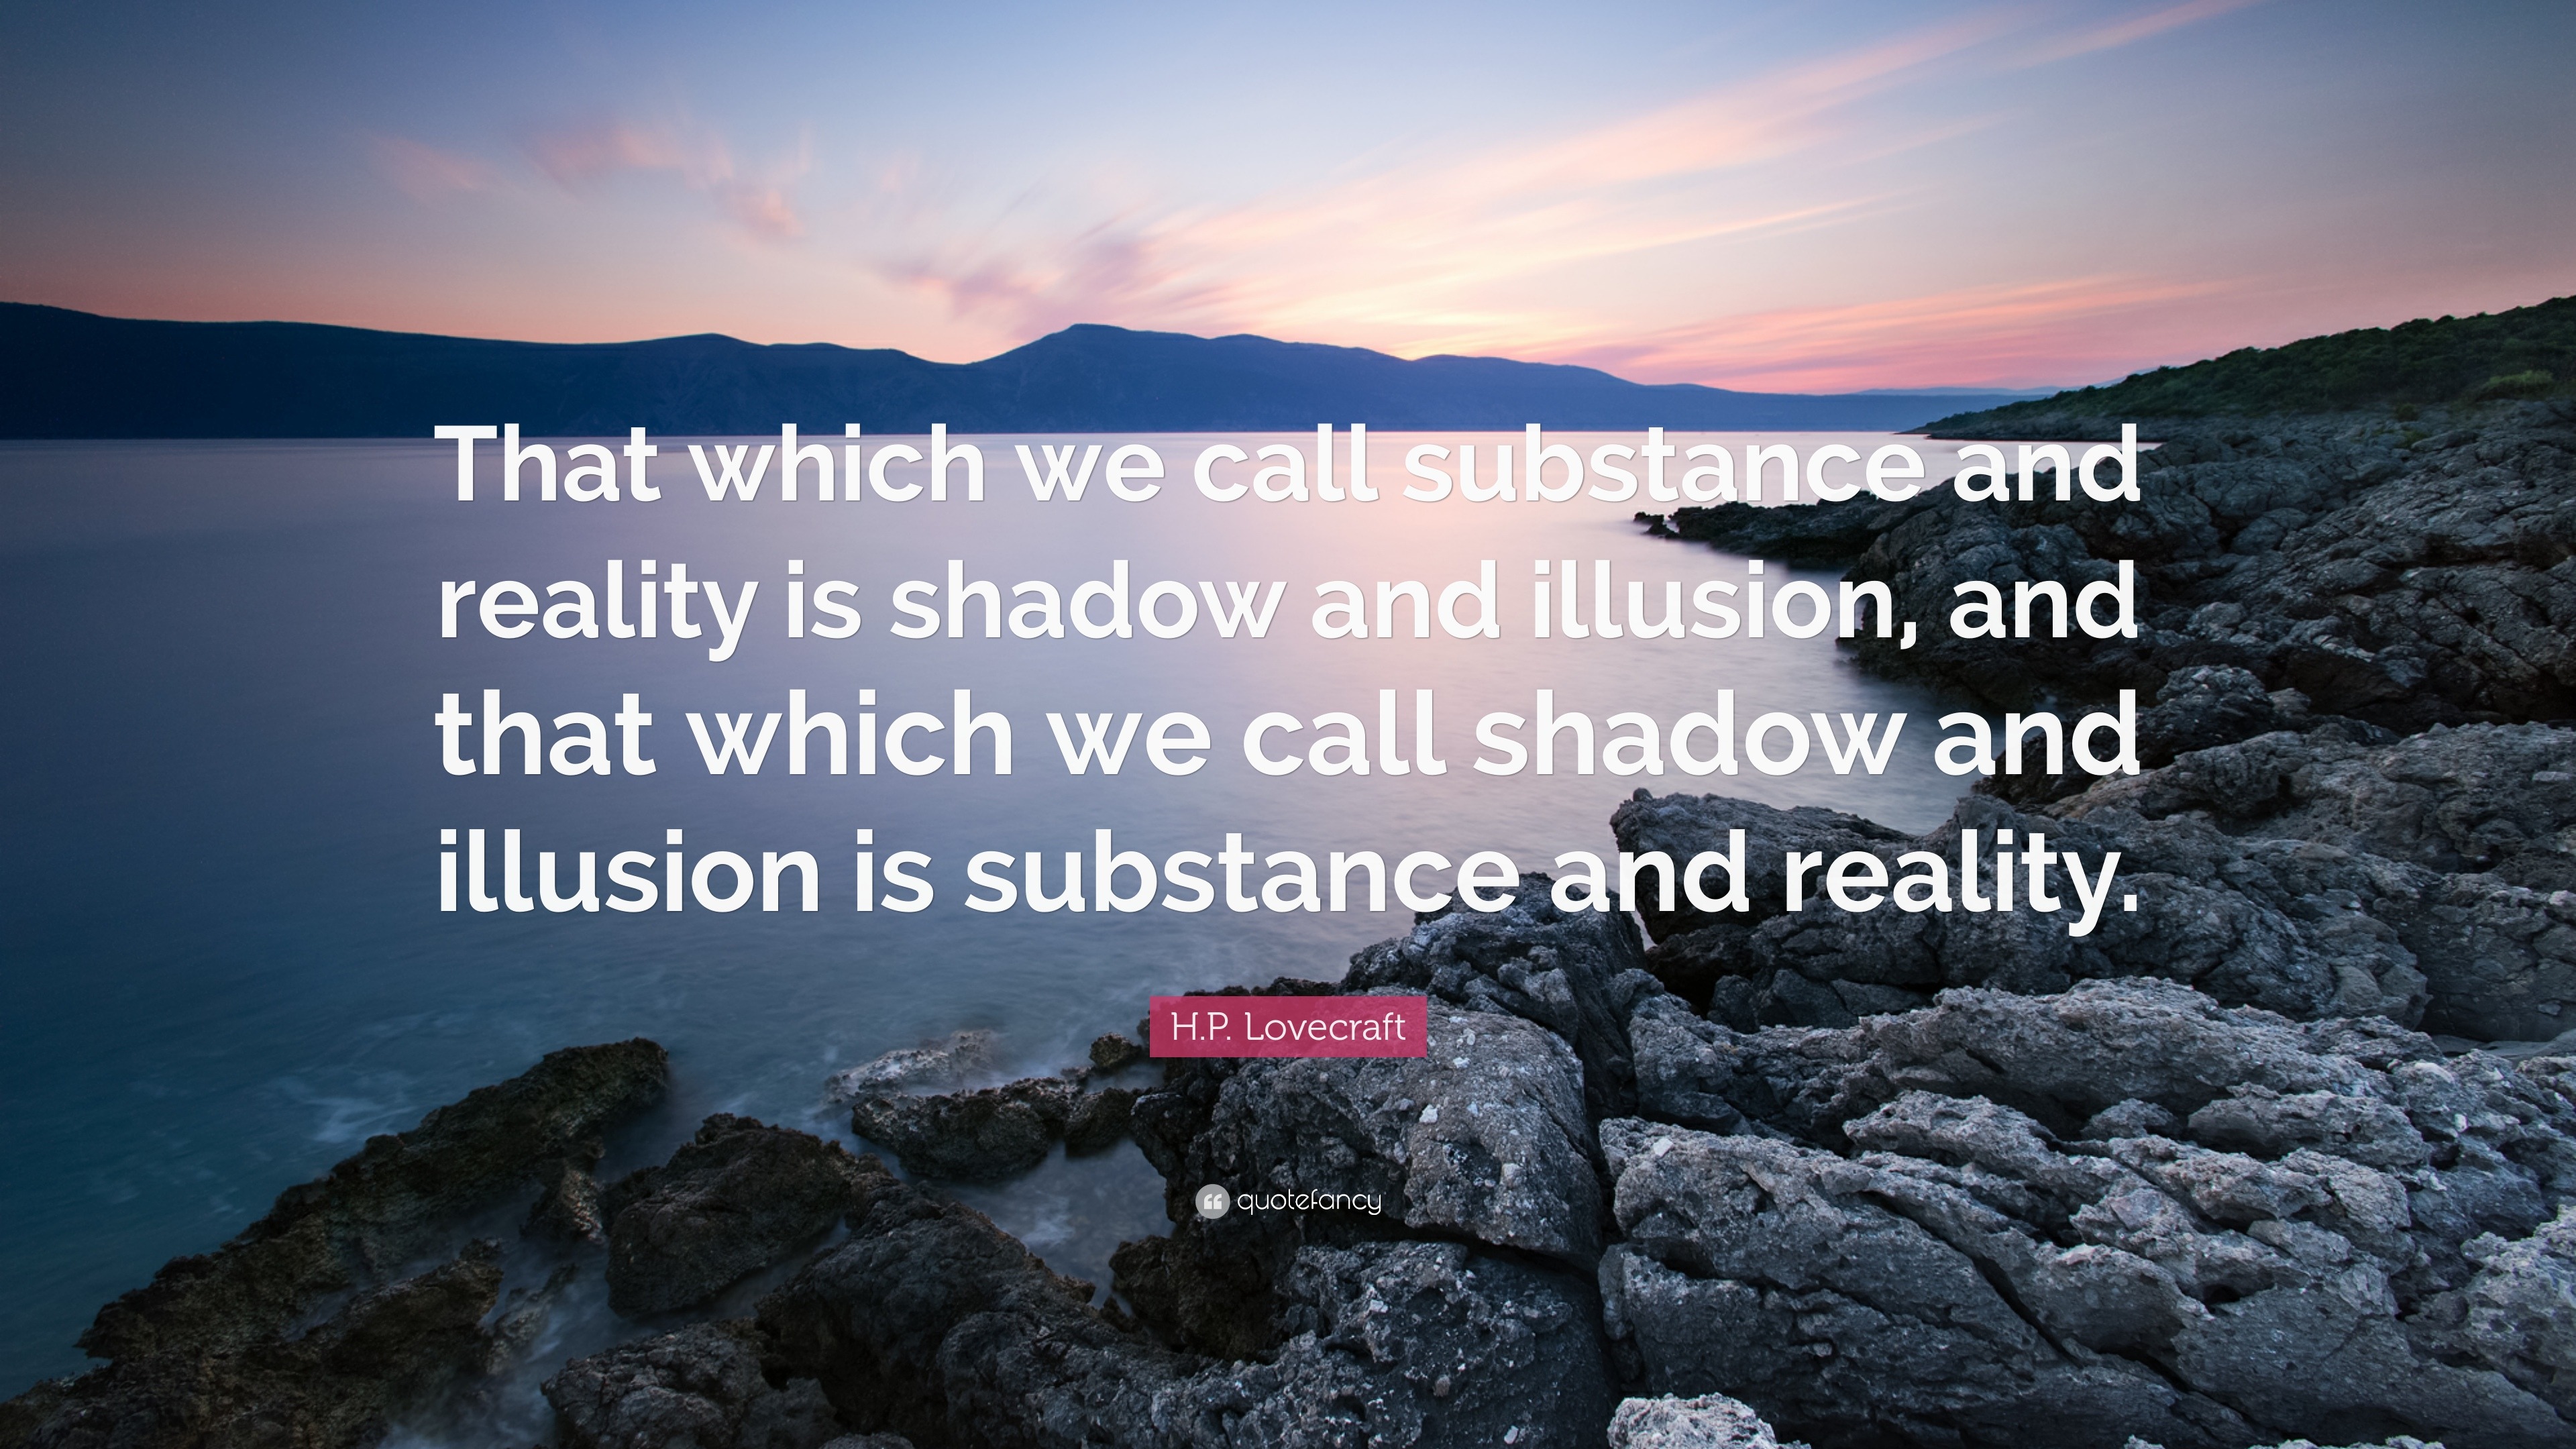 H.P. Lovecraft Quote: “That which we call substance and reality is ...